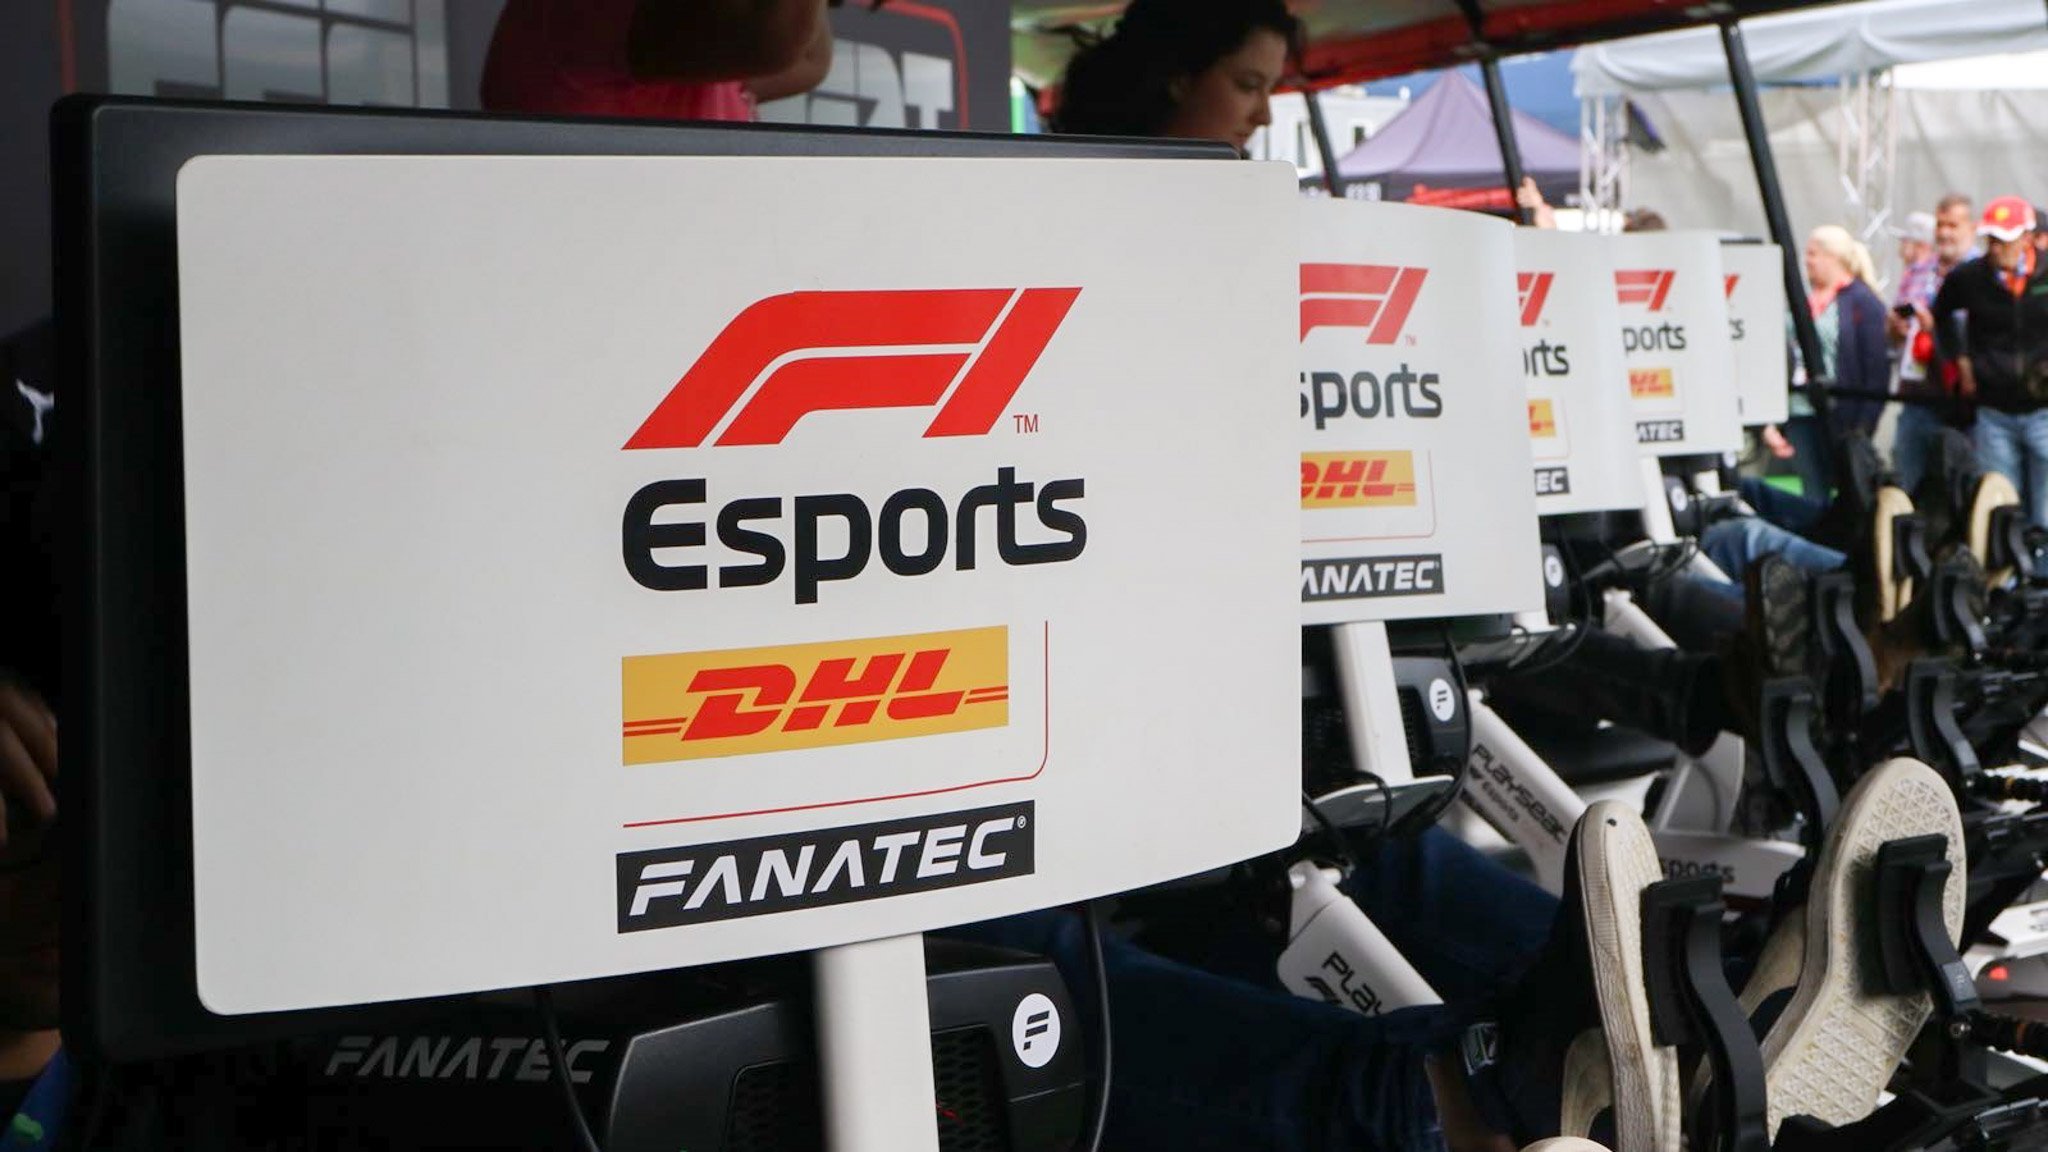 More information about "F1 Esports Pro Draft: si parte fra polemiche e show..."